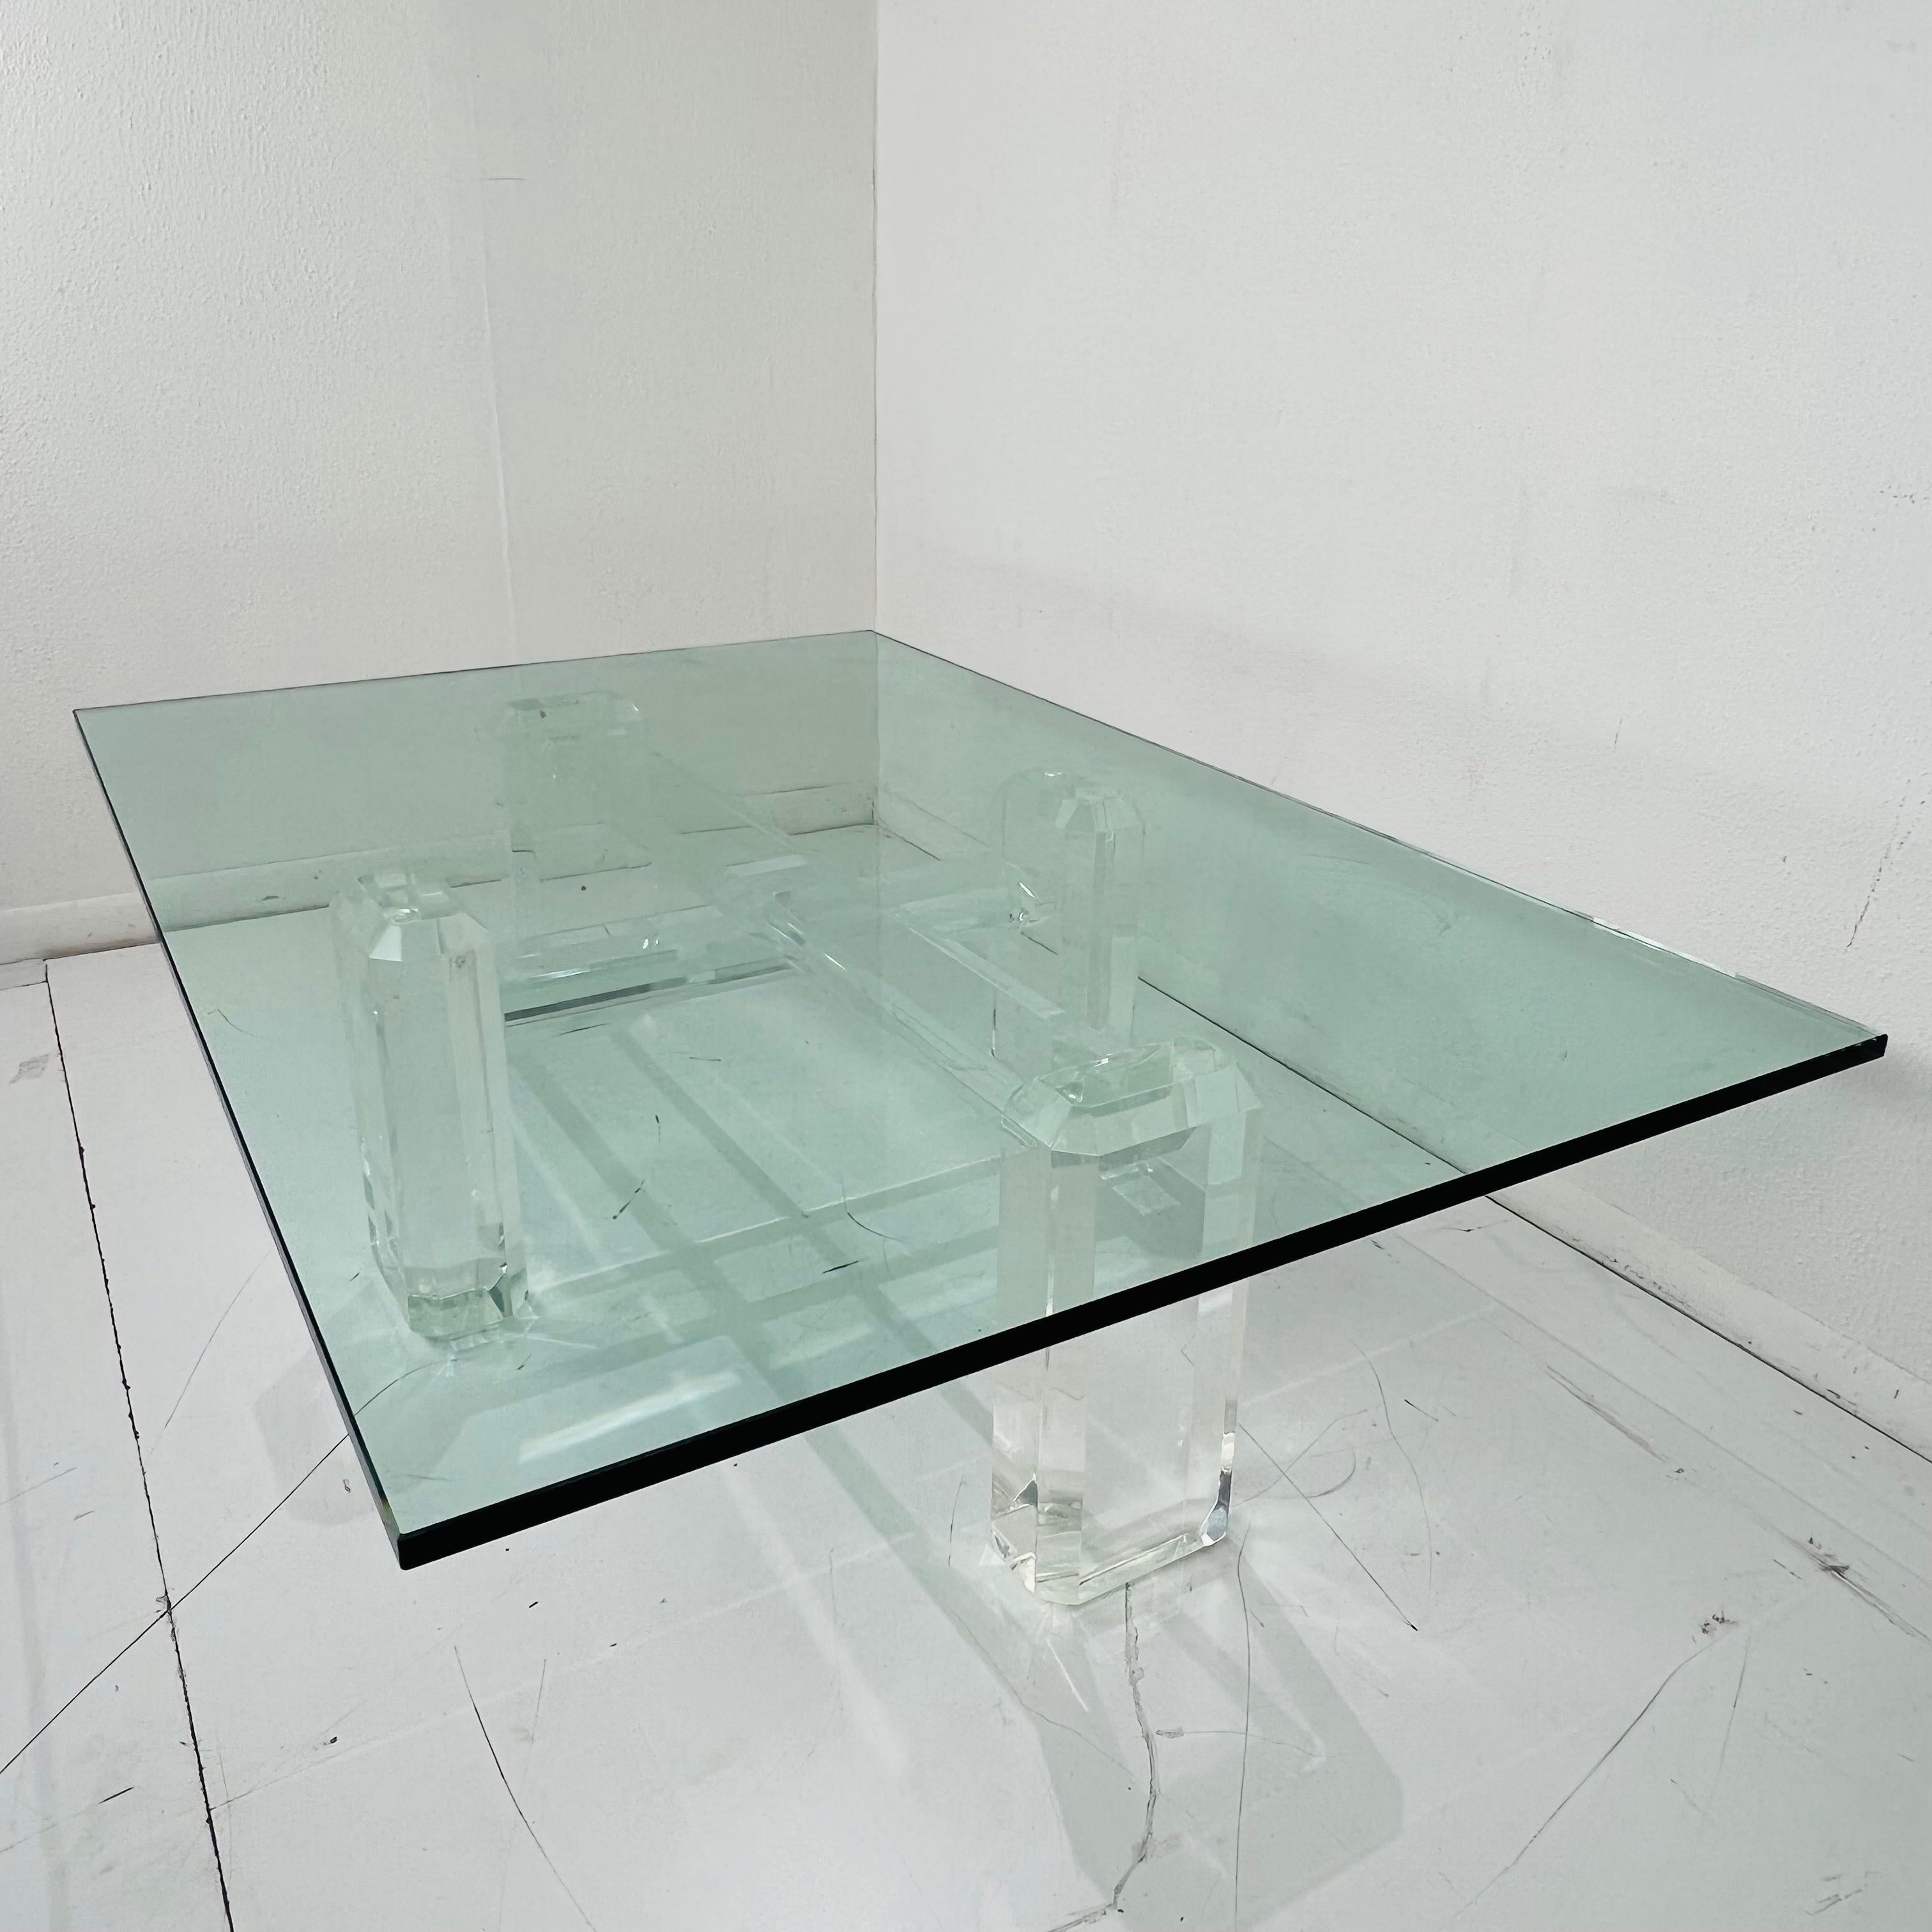 Gorgeous 1980s Monumental Lucite coffee table with glass top, attributed to Karl Springer. Bulky pillar legs meet in a cross shape to support the thick glass resting on top. Beautiful condition, lucite is clear and has minimal scratches/scuffs.